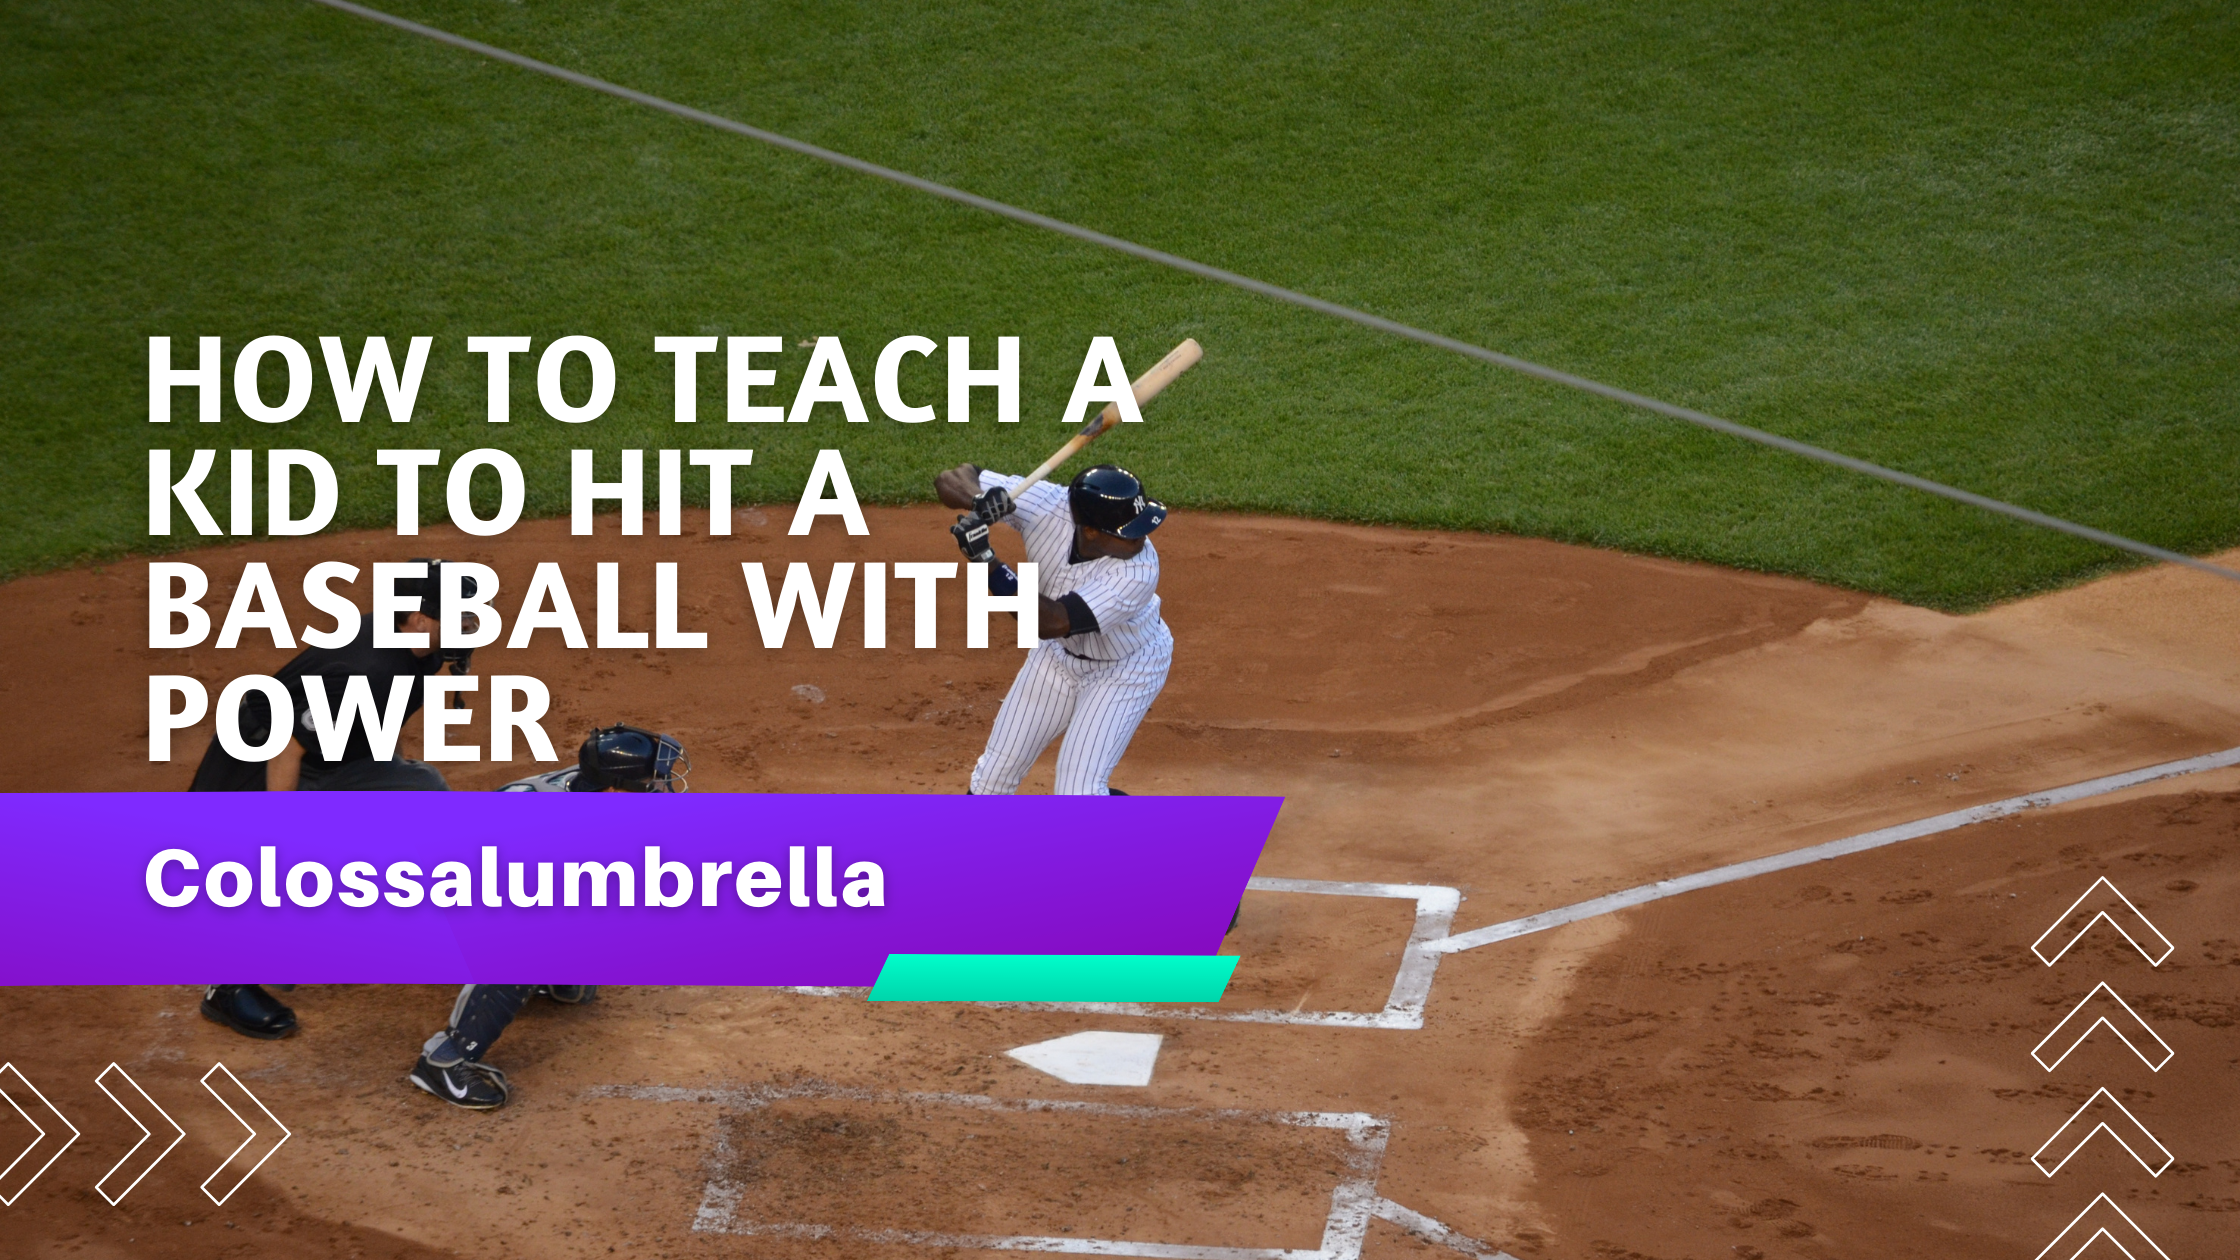 Easy steps on How to Teach a 7 Year Old to Hit a Baseball